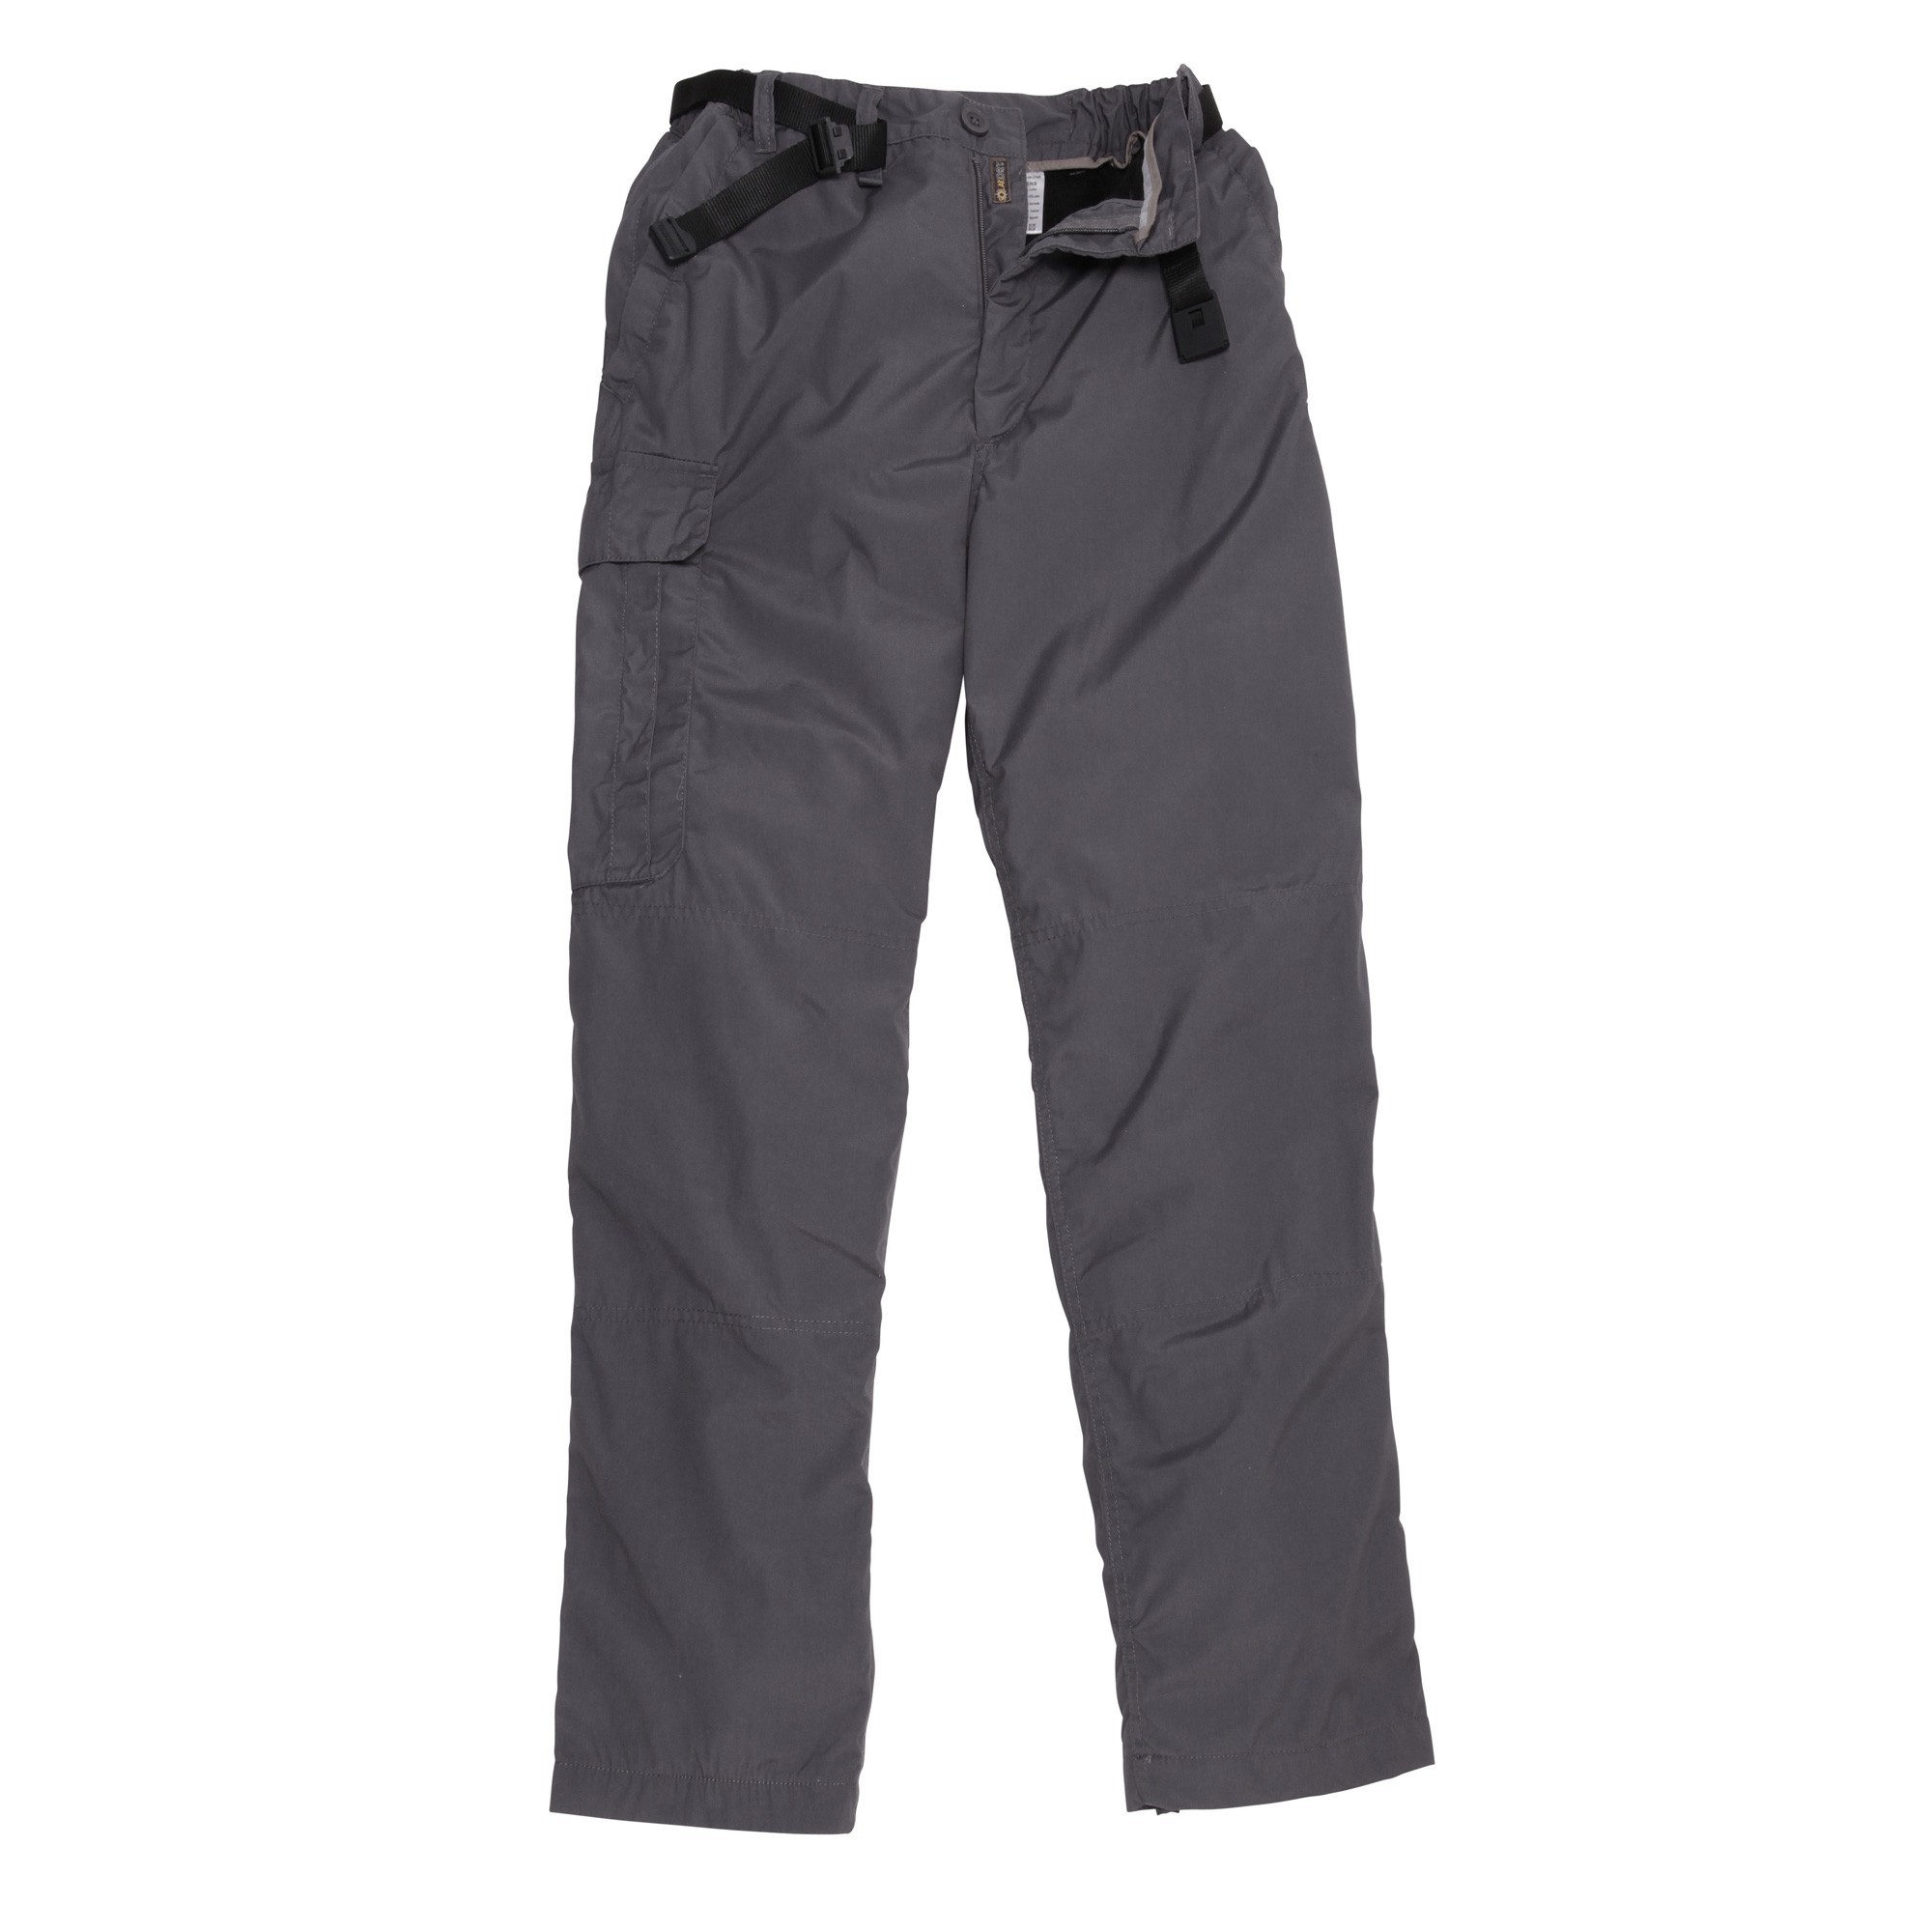 Craghoppers Kiwi Winter Lined Men's Trousers - Elephant by Craghoppers ...